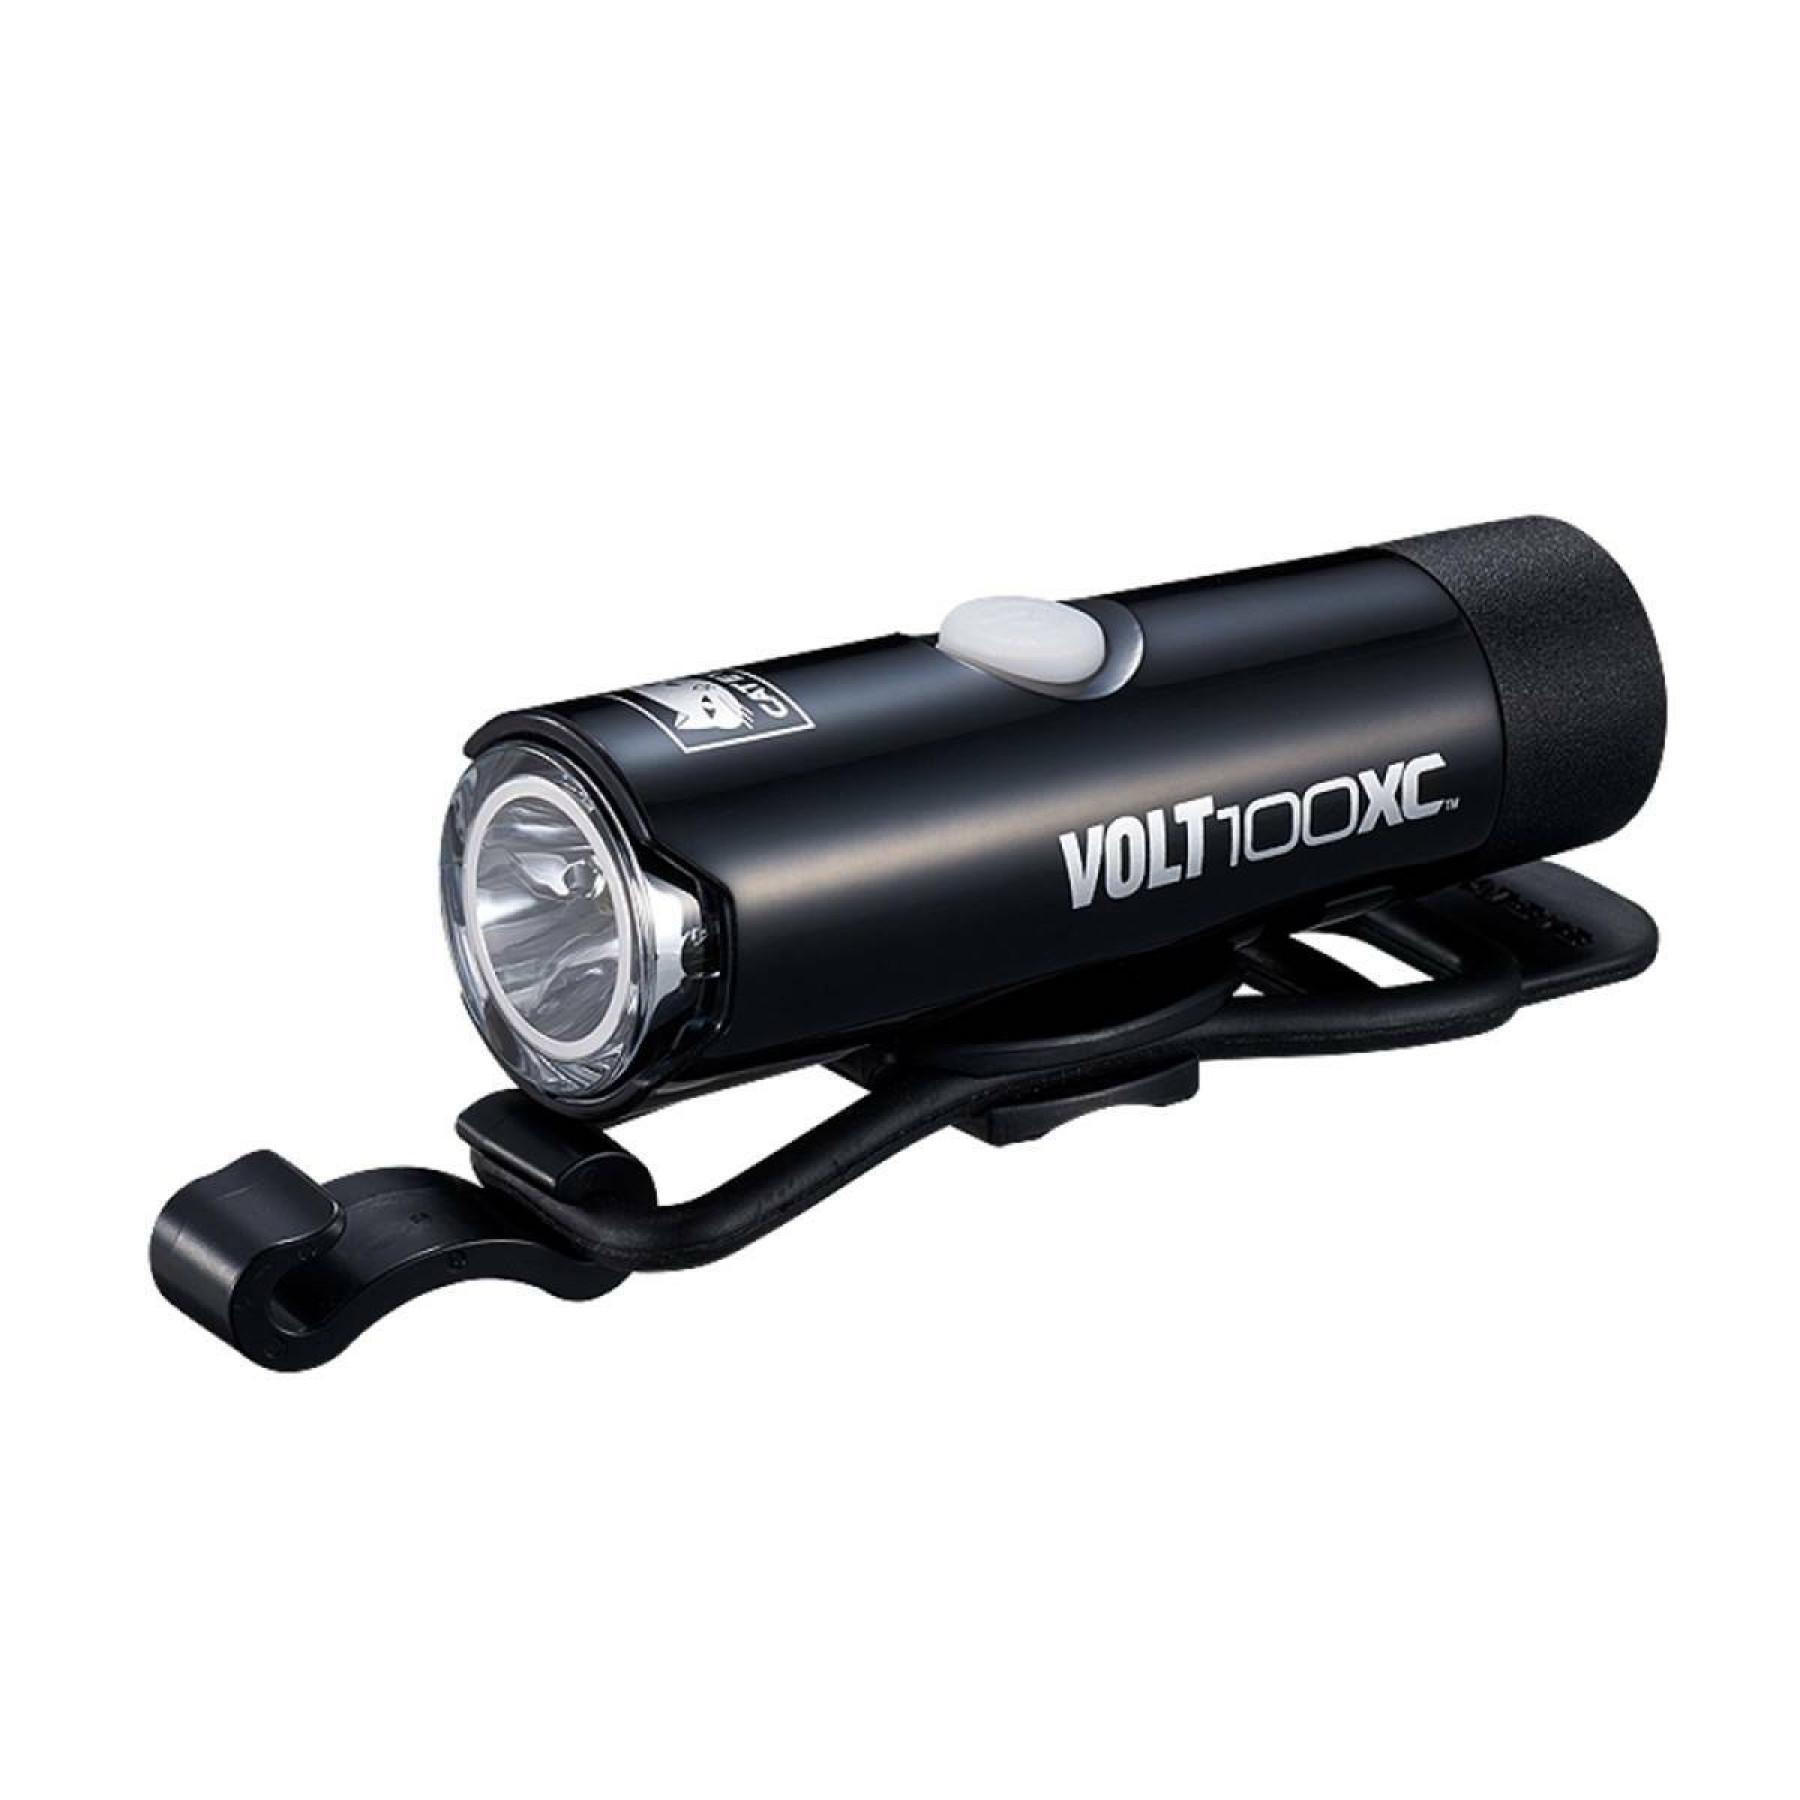 illuminazione Cateye Volt 100 XC rechargeable/Orb pile